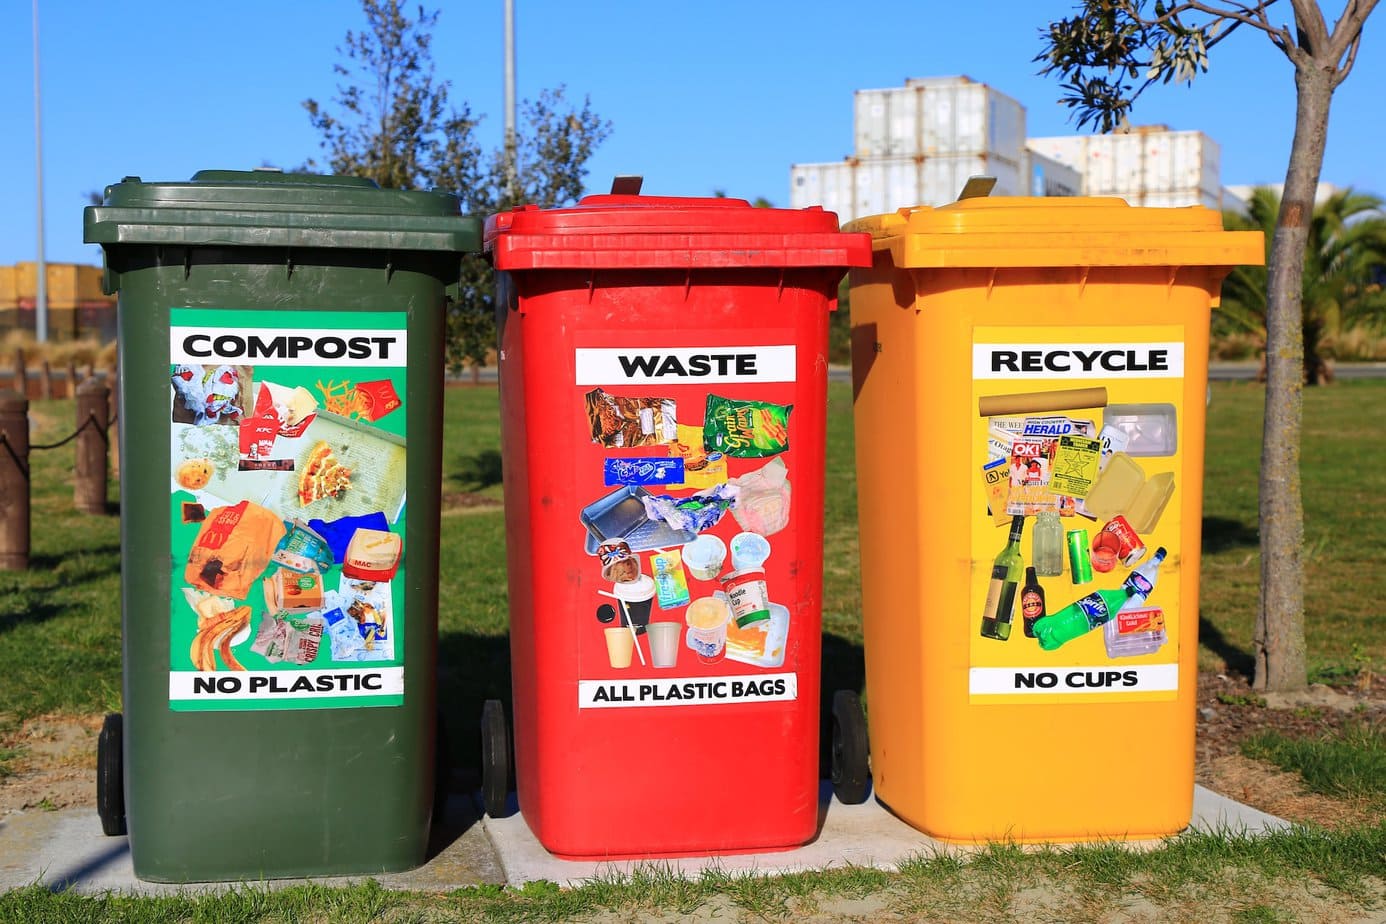 Recycling, upcycling and downcycling – what do these terms actually mean?